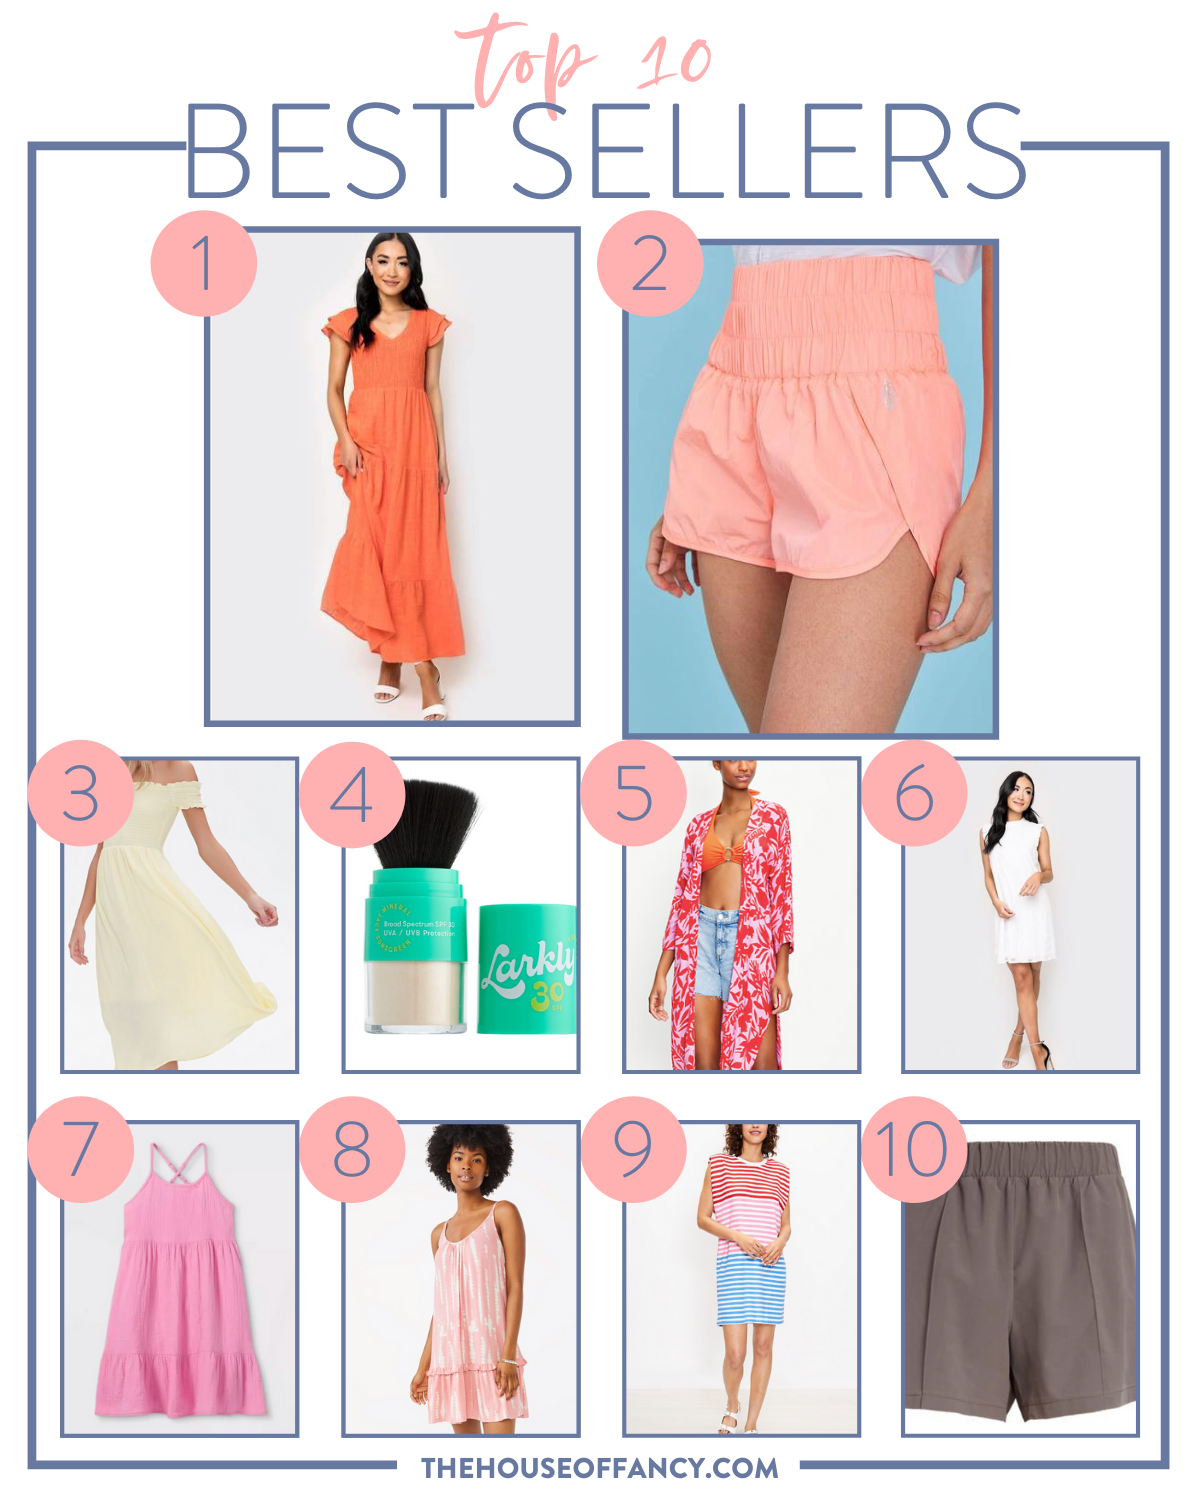 Best Sellers by poplar Houston fashion blog, The House of Fashion: collage image of orange flutter sleeve maxi dress, pink smock waist shorts, yellow smock off the shoulder maxi dress, darkly highlighter, pink tropical print kimono, and white sleeveless dress. 